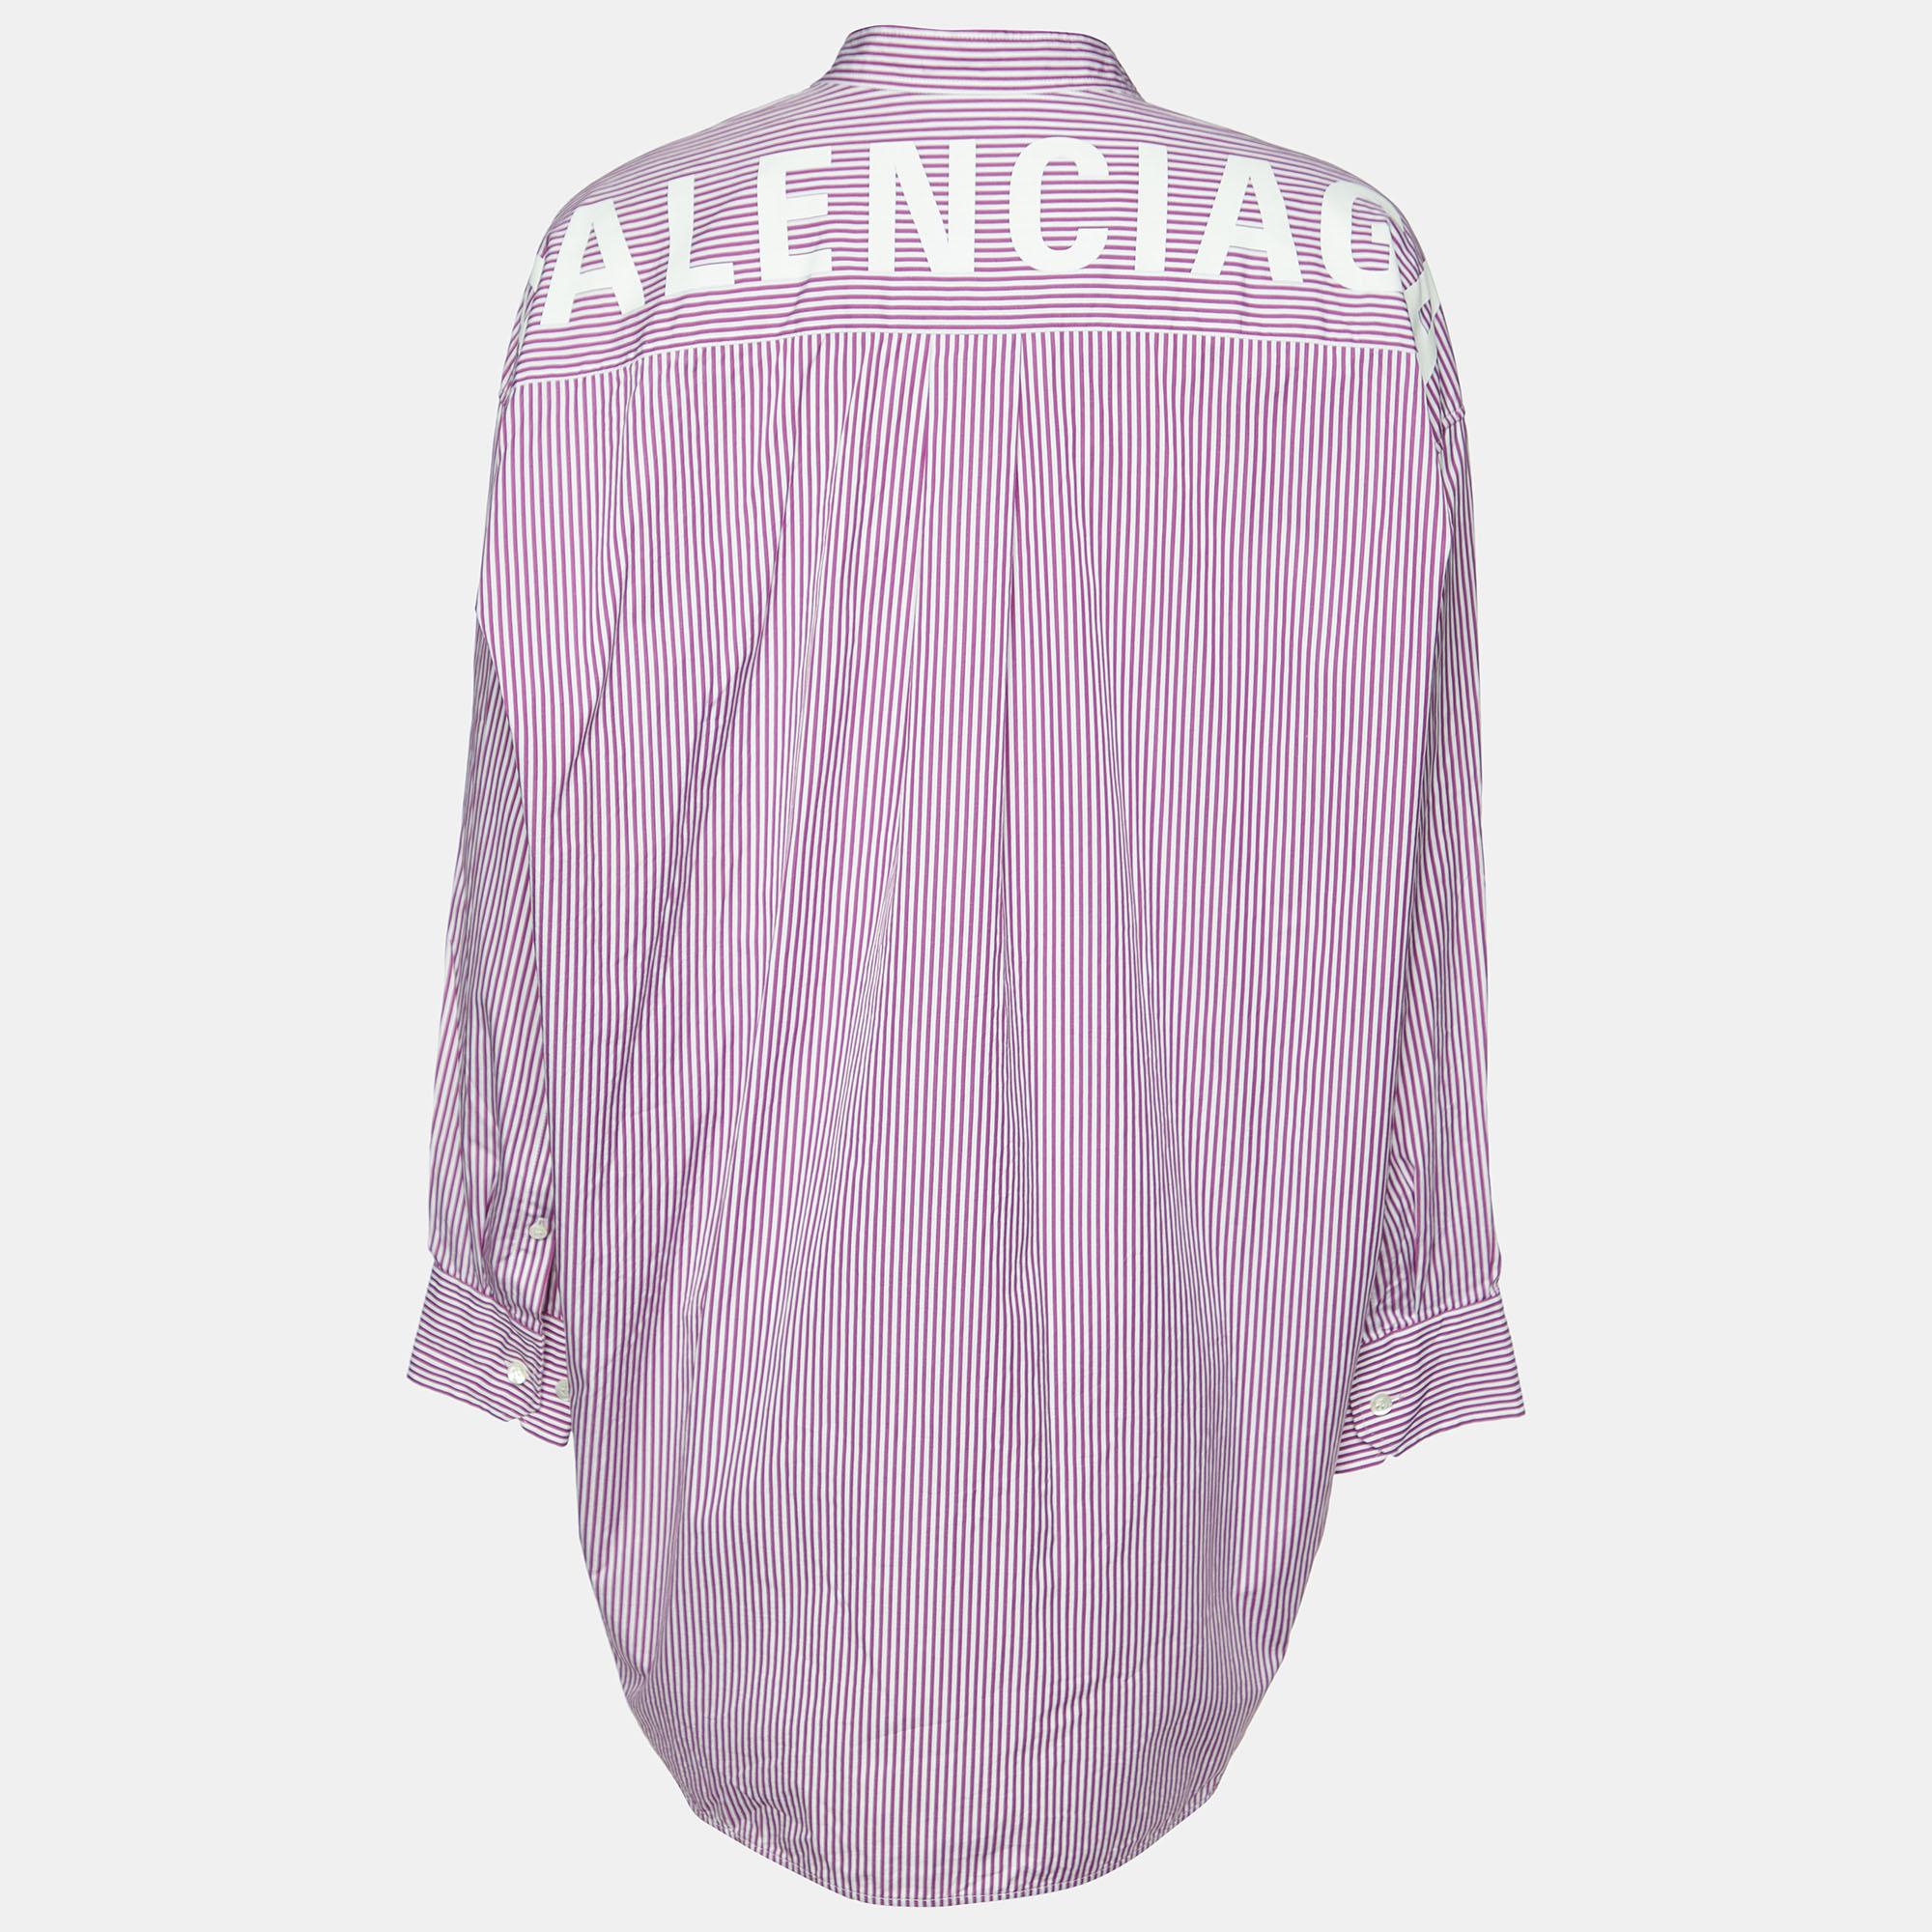 Stripes all over offer a classic look to this oversized shirt by Balenciaga. Tailored using cotton, the women's shirt features long cuff sleeves, a tie detail, and the brand name on the back.

